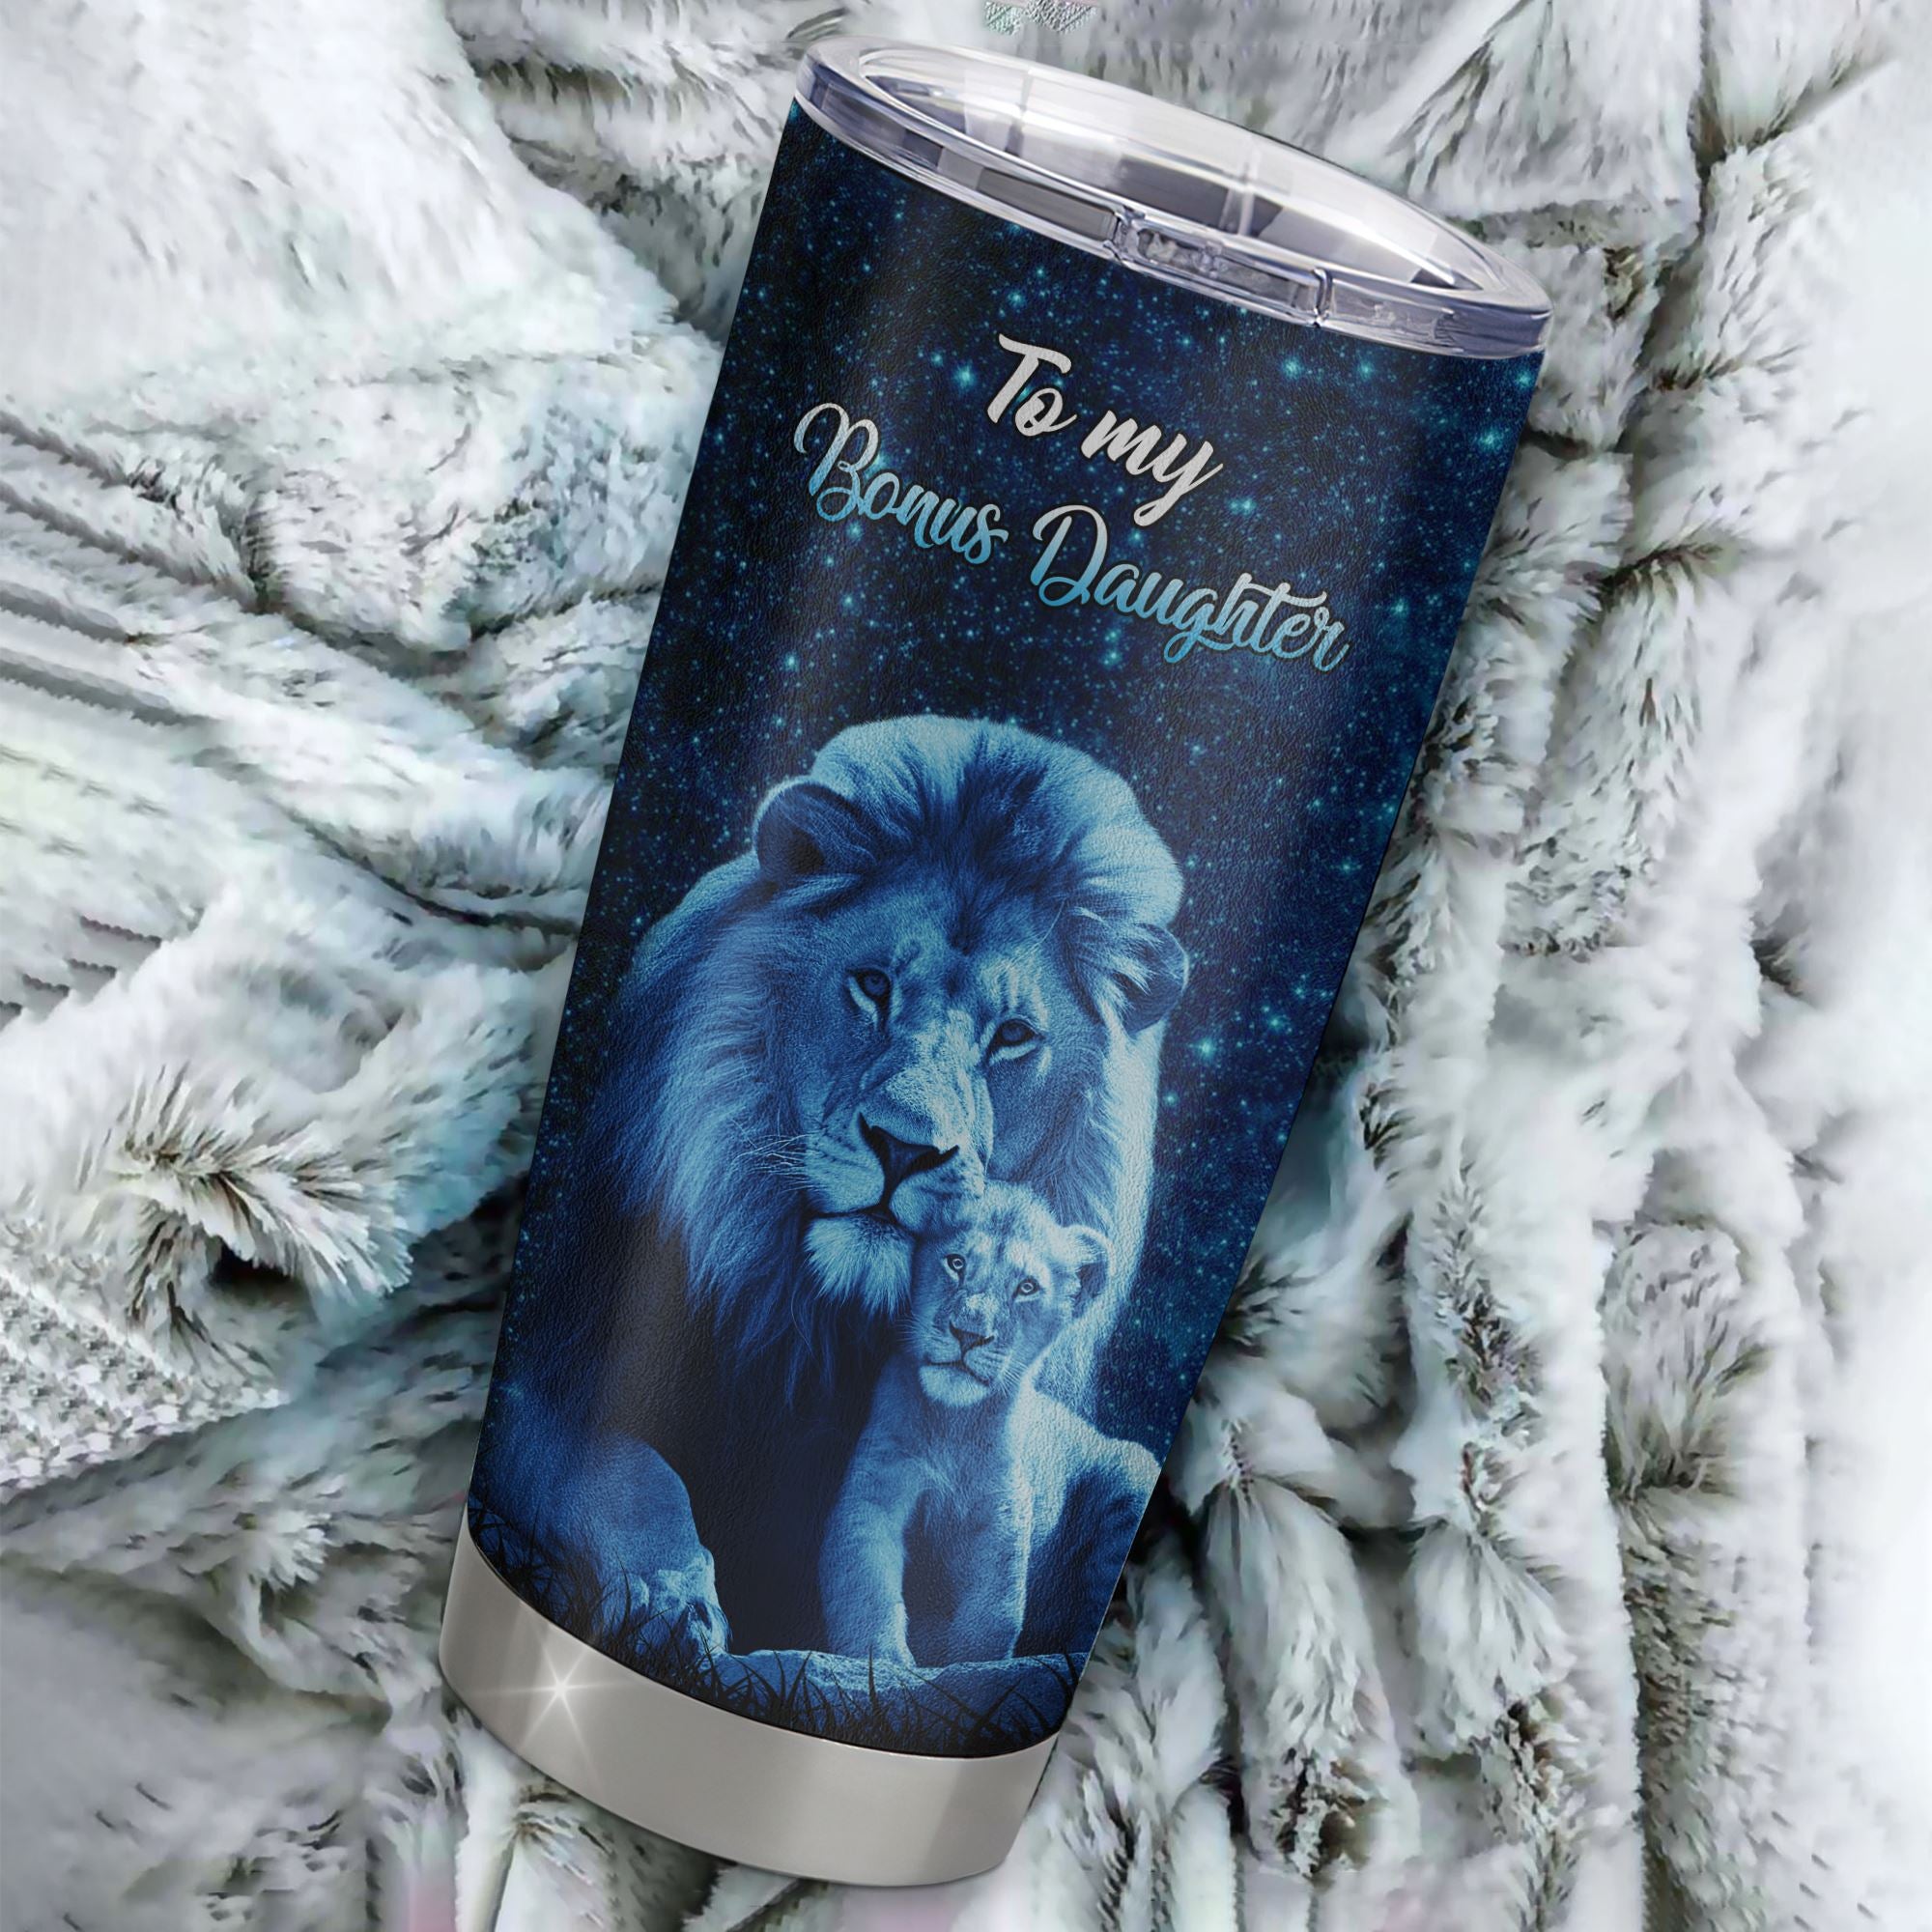 Personalized_To_My_Bonus_Daughter_Tumbler_From_Stepfather_Stainless_Steel_Cup_This_Old_Lion_Love_You_Stepdaughter_Birthday_Graduation_Christmas_Travel_Mug_Tumbler_mockup_1.jpg